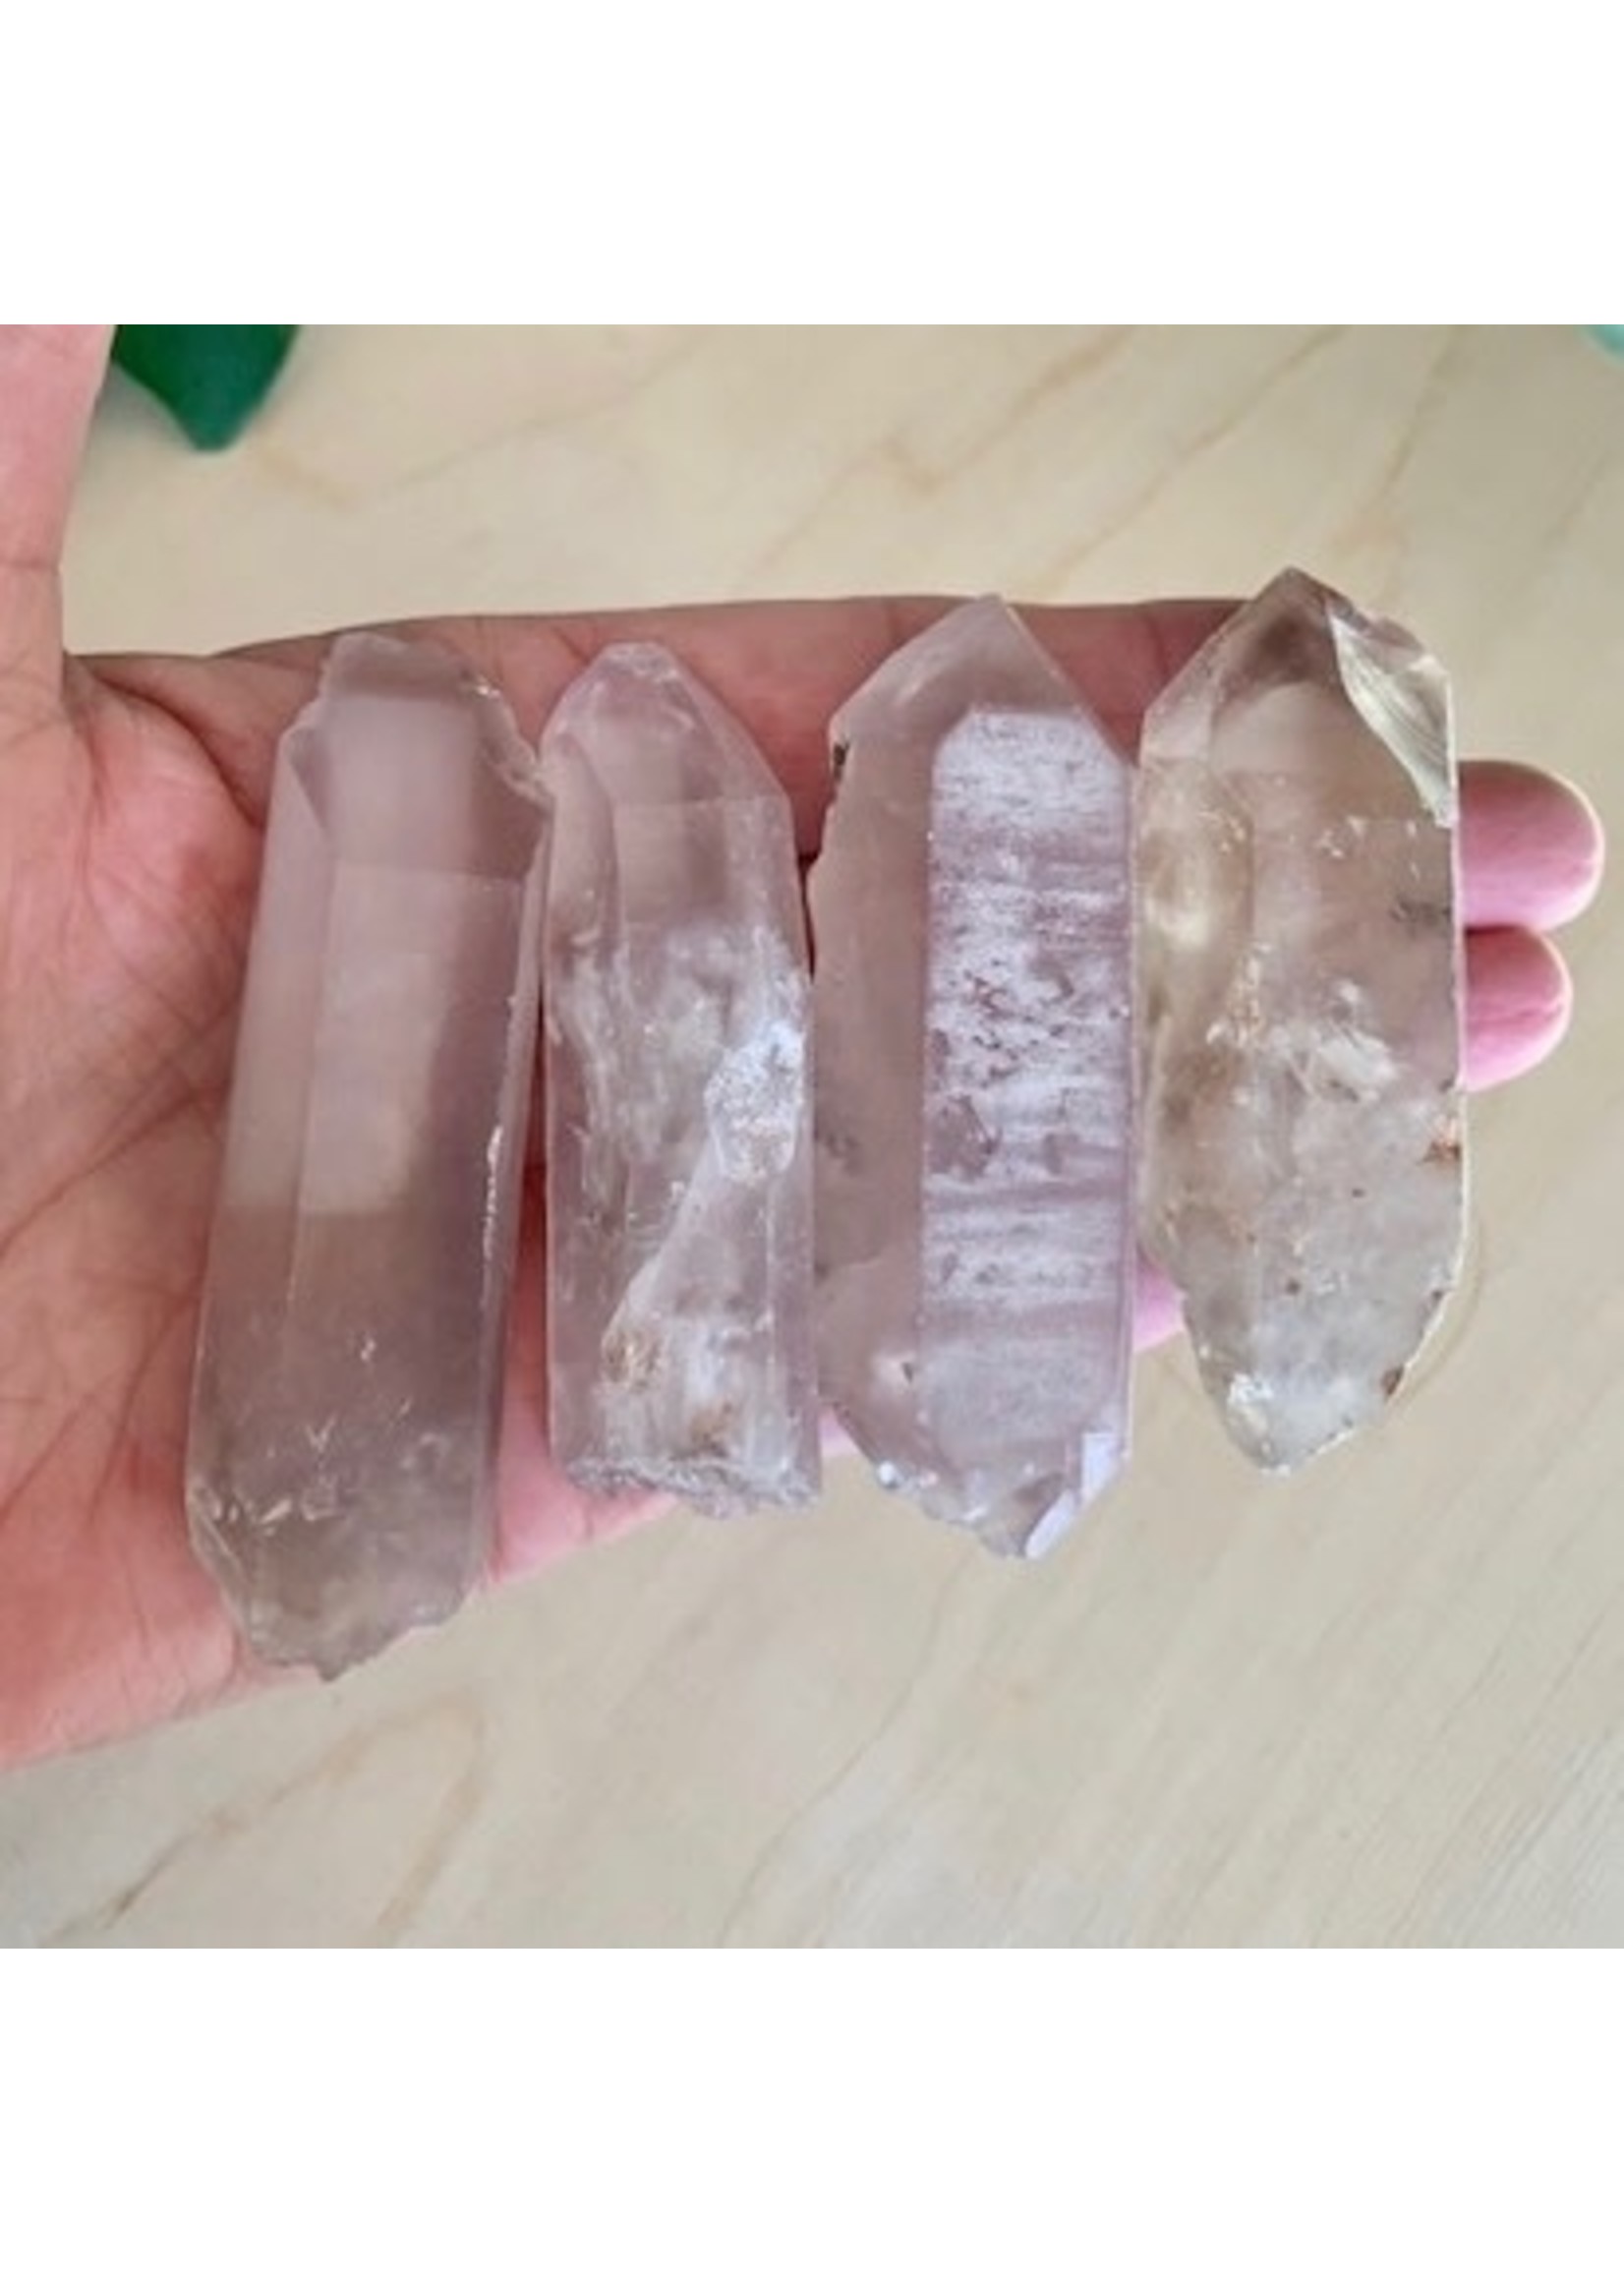 Lithium Quartz Points for growth and expansion